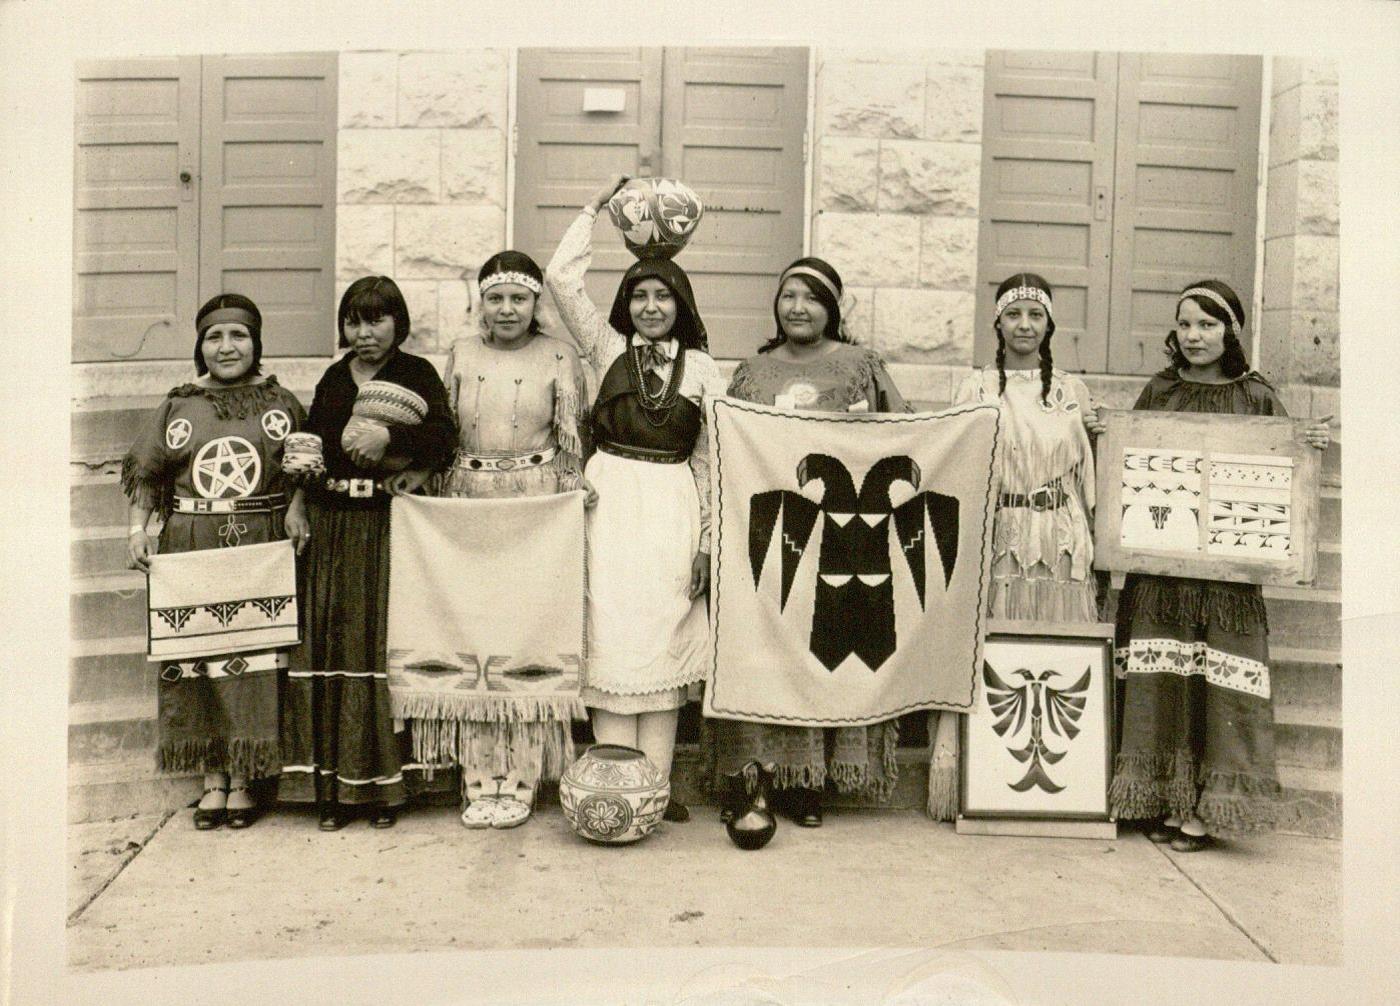 Unknown Haskell students. Photograph of Haskell Activities, 1930s. 